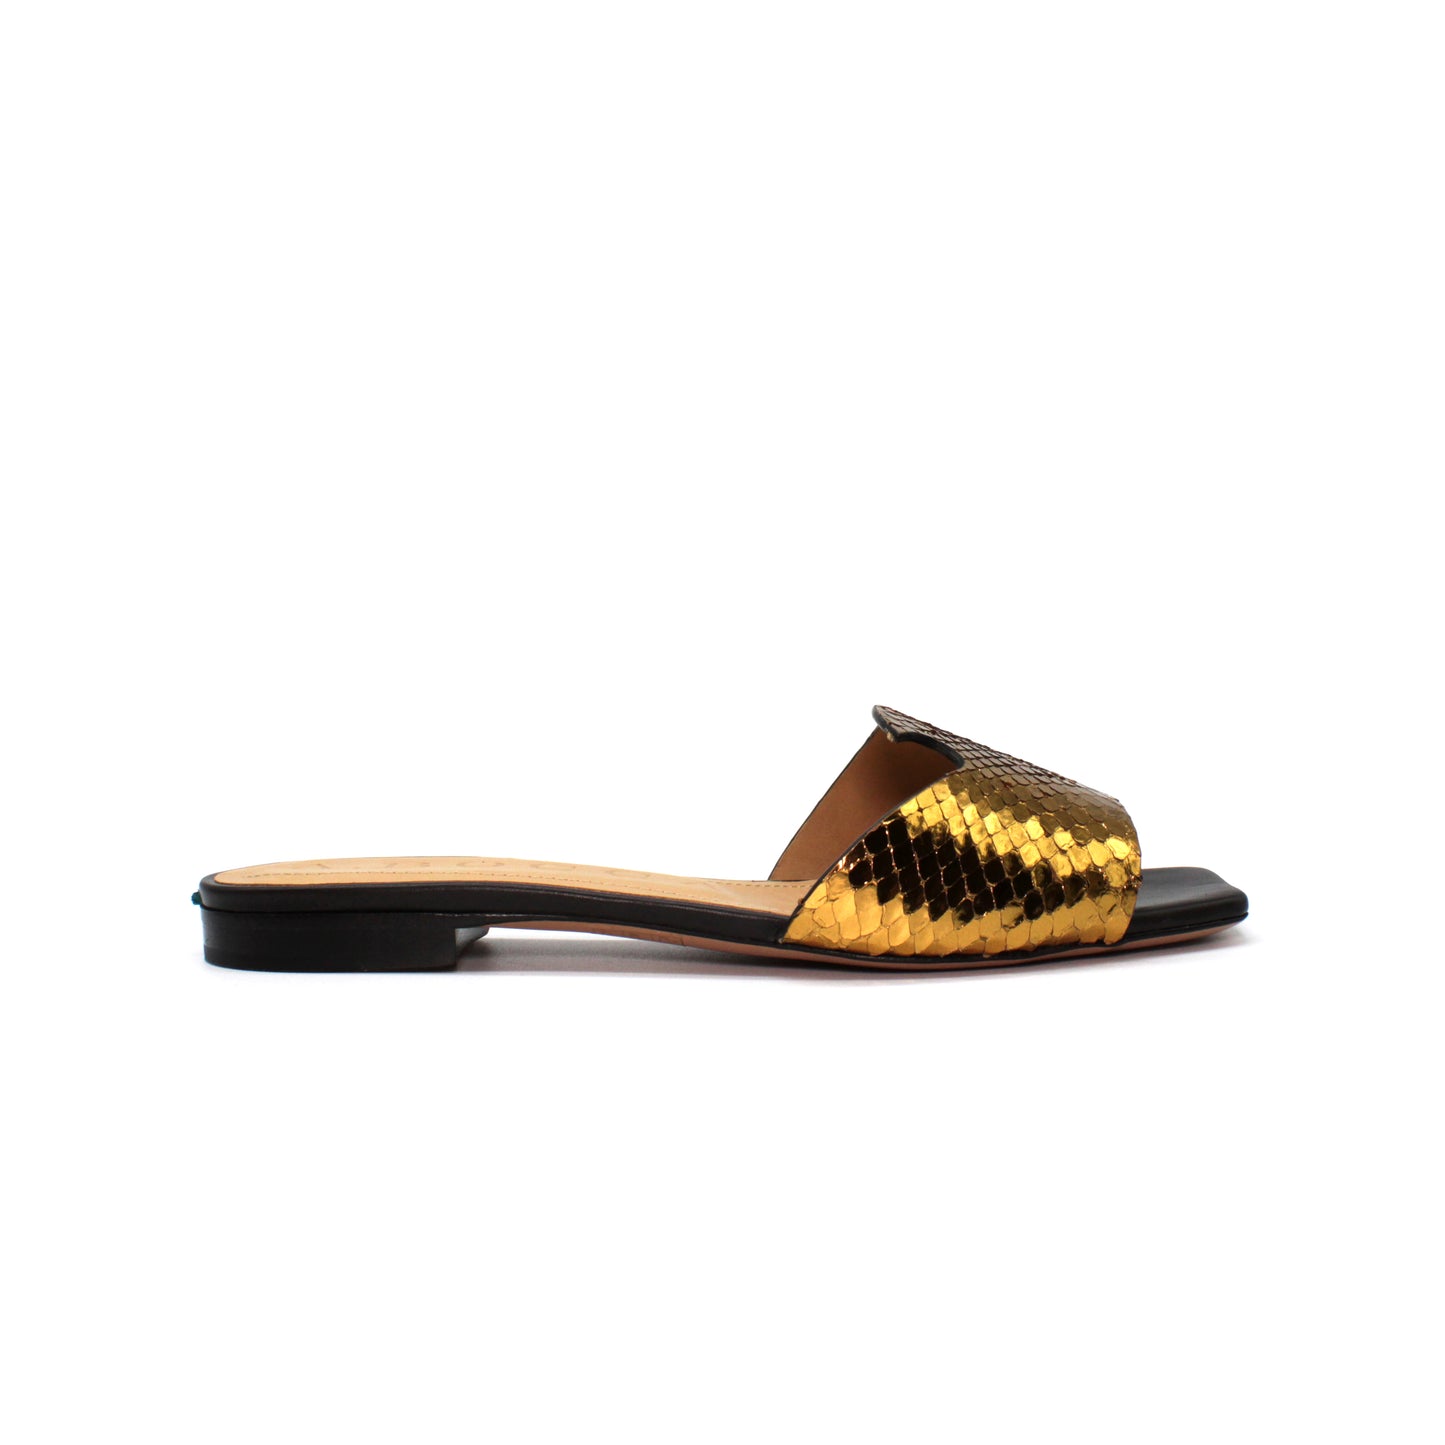 A.Bocca Slide in bronze-colored laminated leather